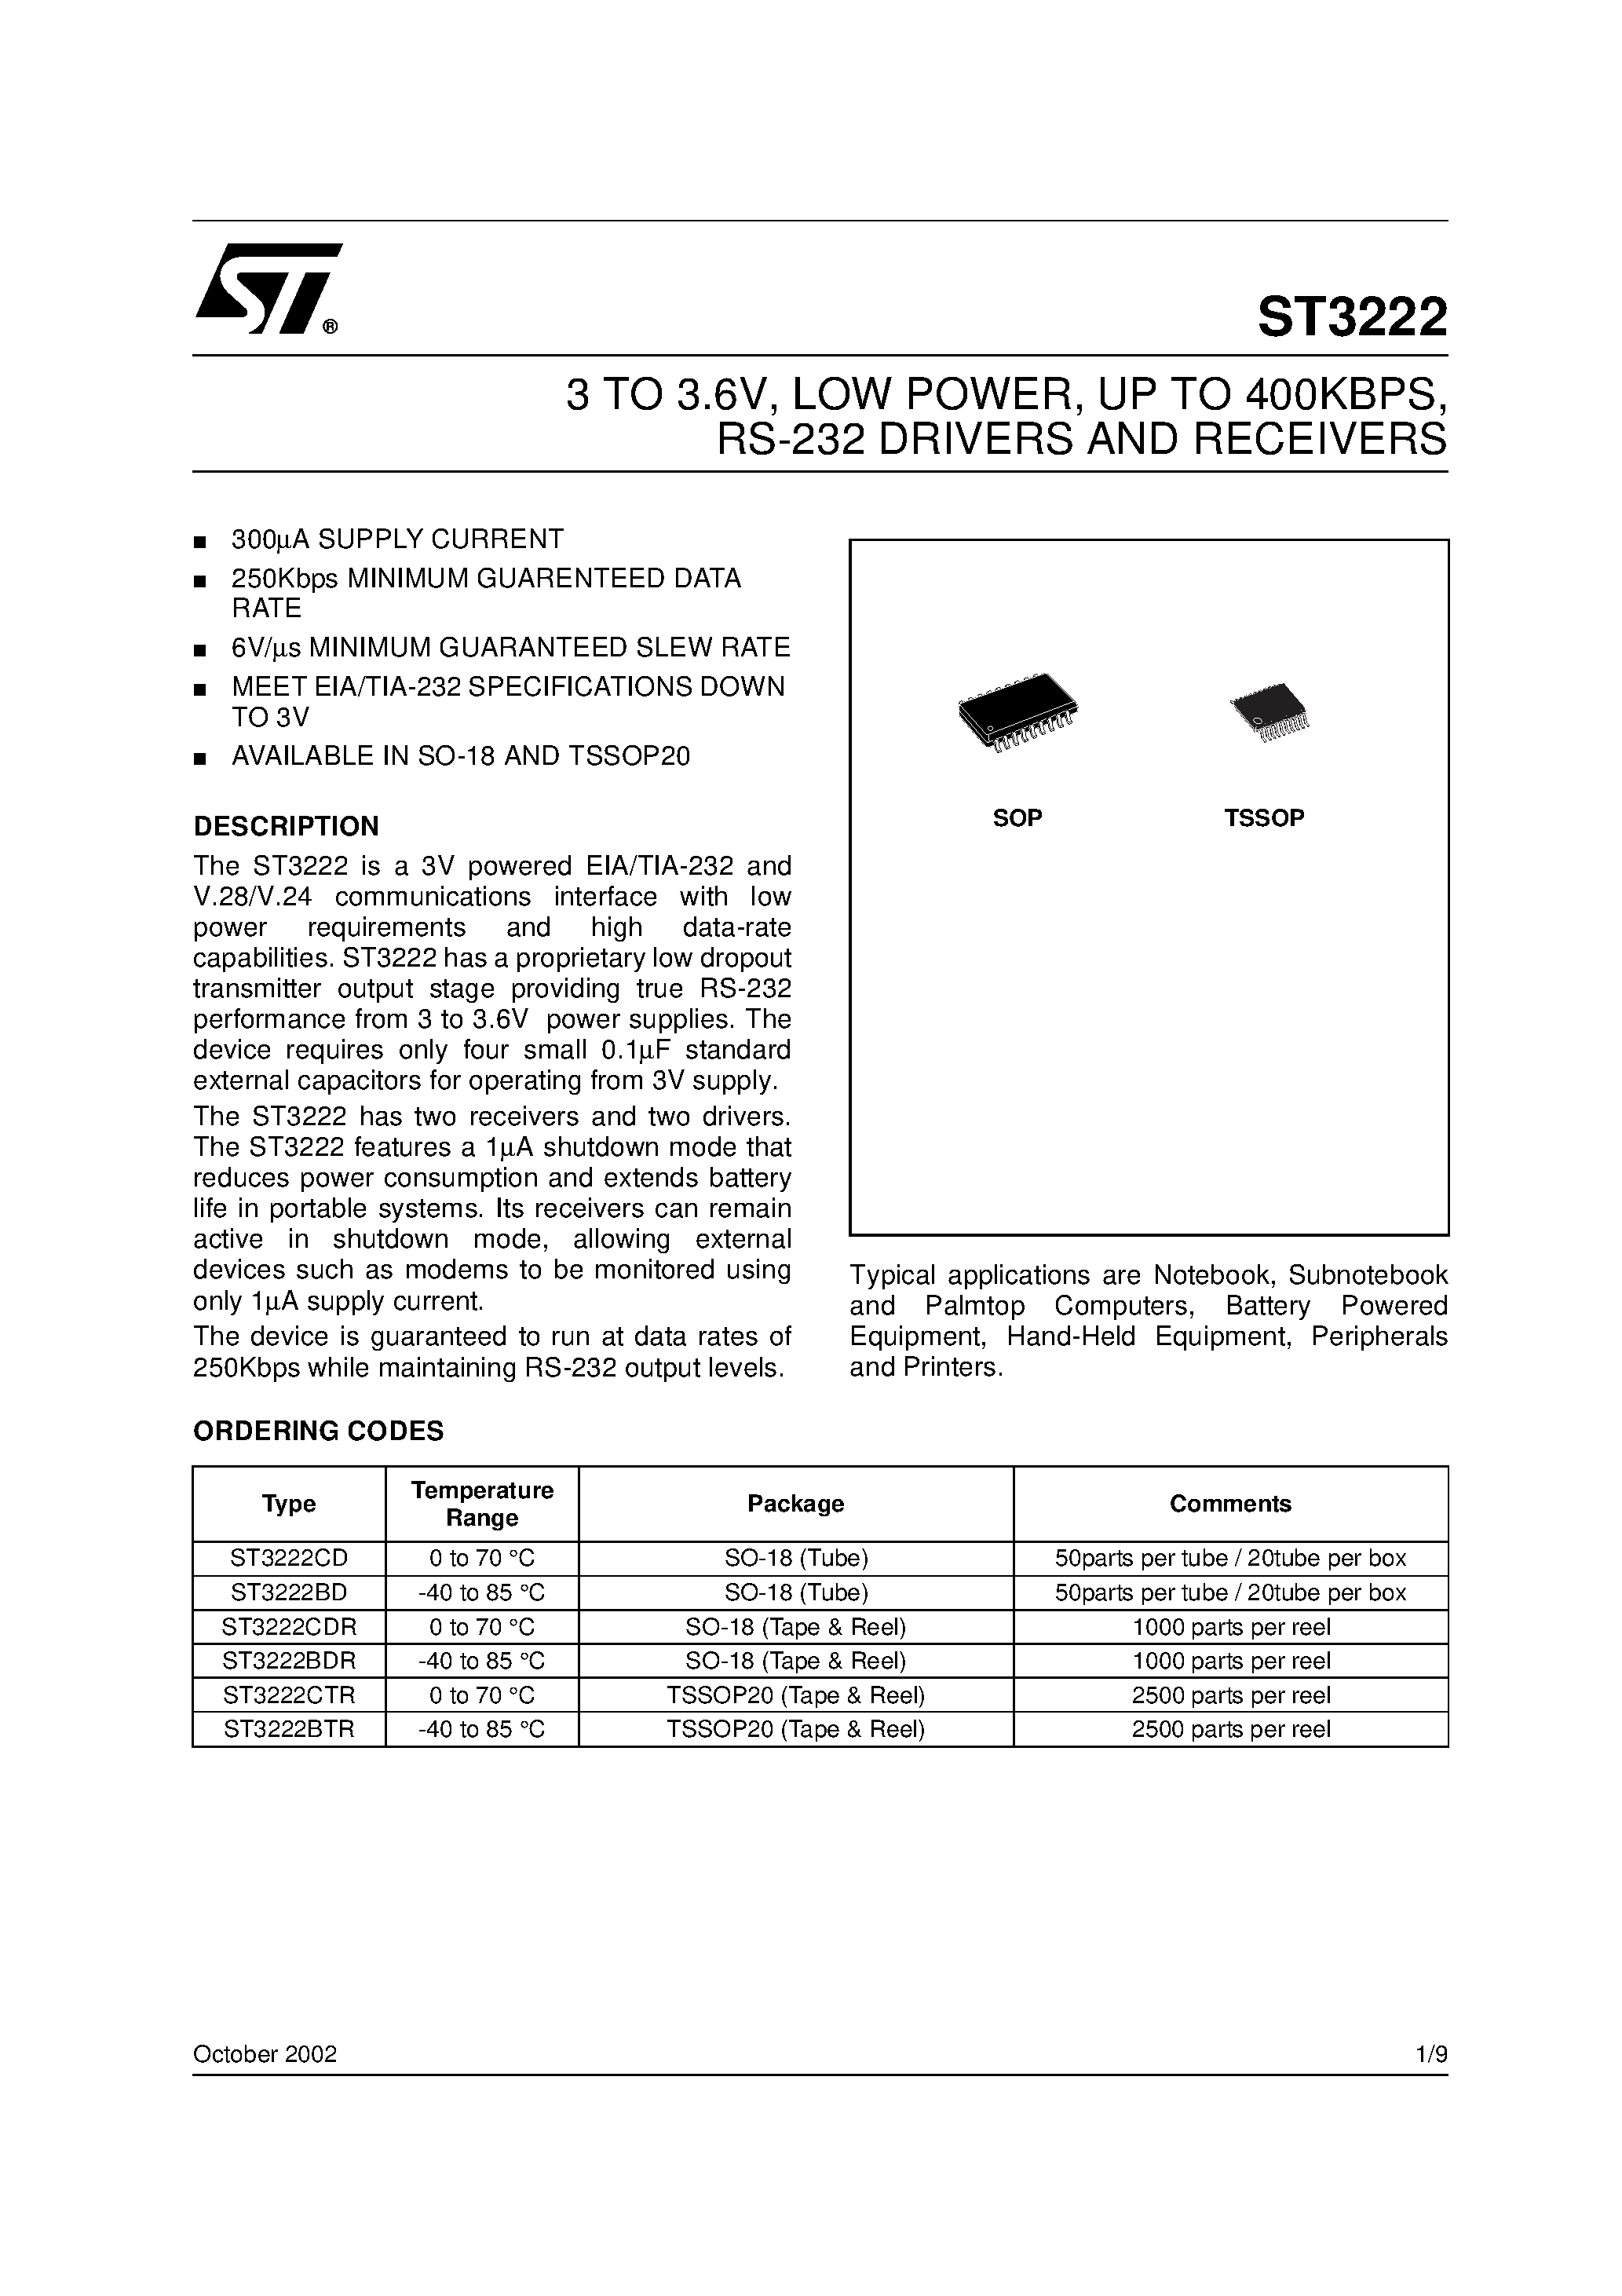 Datasheet ST3222 - RS-232 DRIVERS AND RECEIVERS page 1